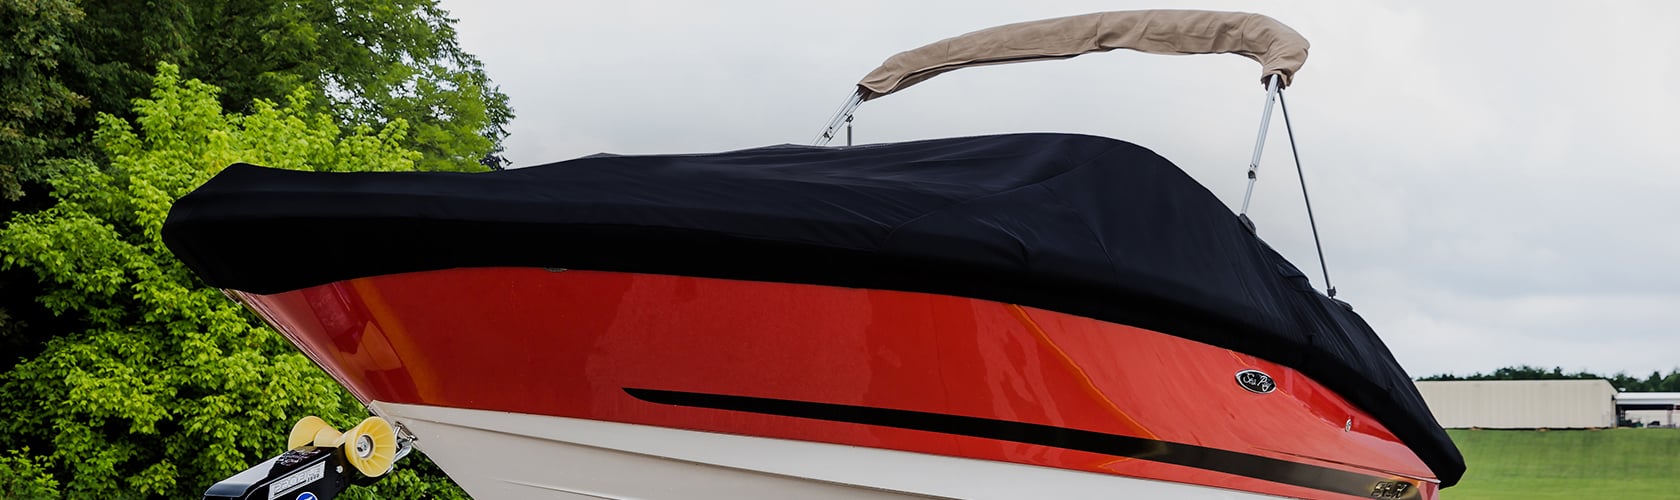 Covermate HD 600 Trailerable Boat Cover for 12'-14' V-Hull Fishing Boat